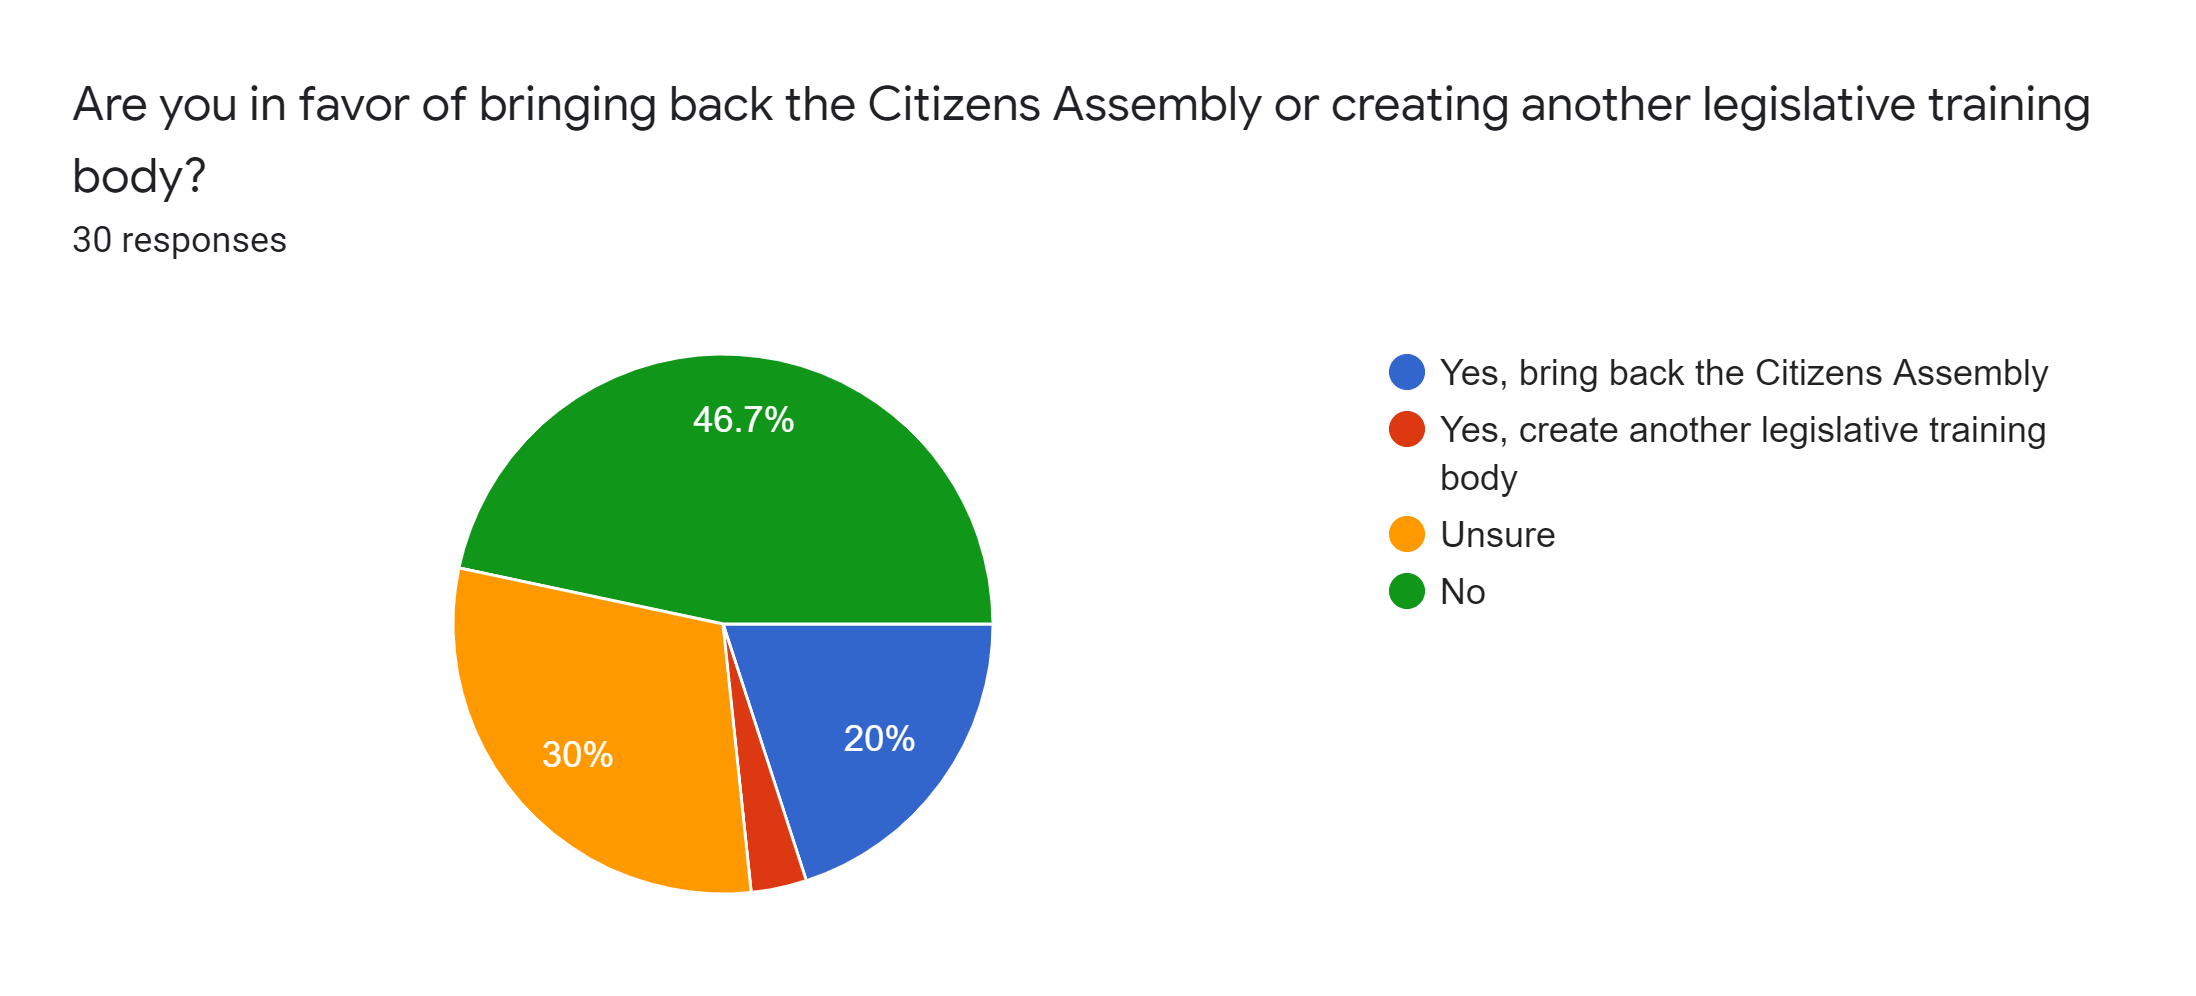 Forms response chart. Question title: Are you in favor of bringing back the Citizens Assembly or creating another legislative training body?. Number of responses: 30 responses.